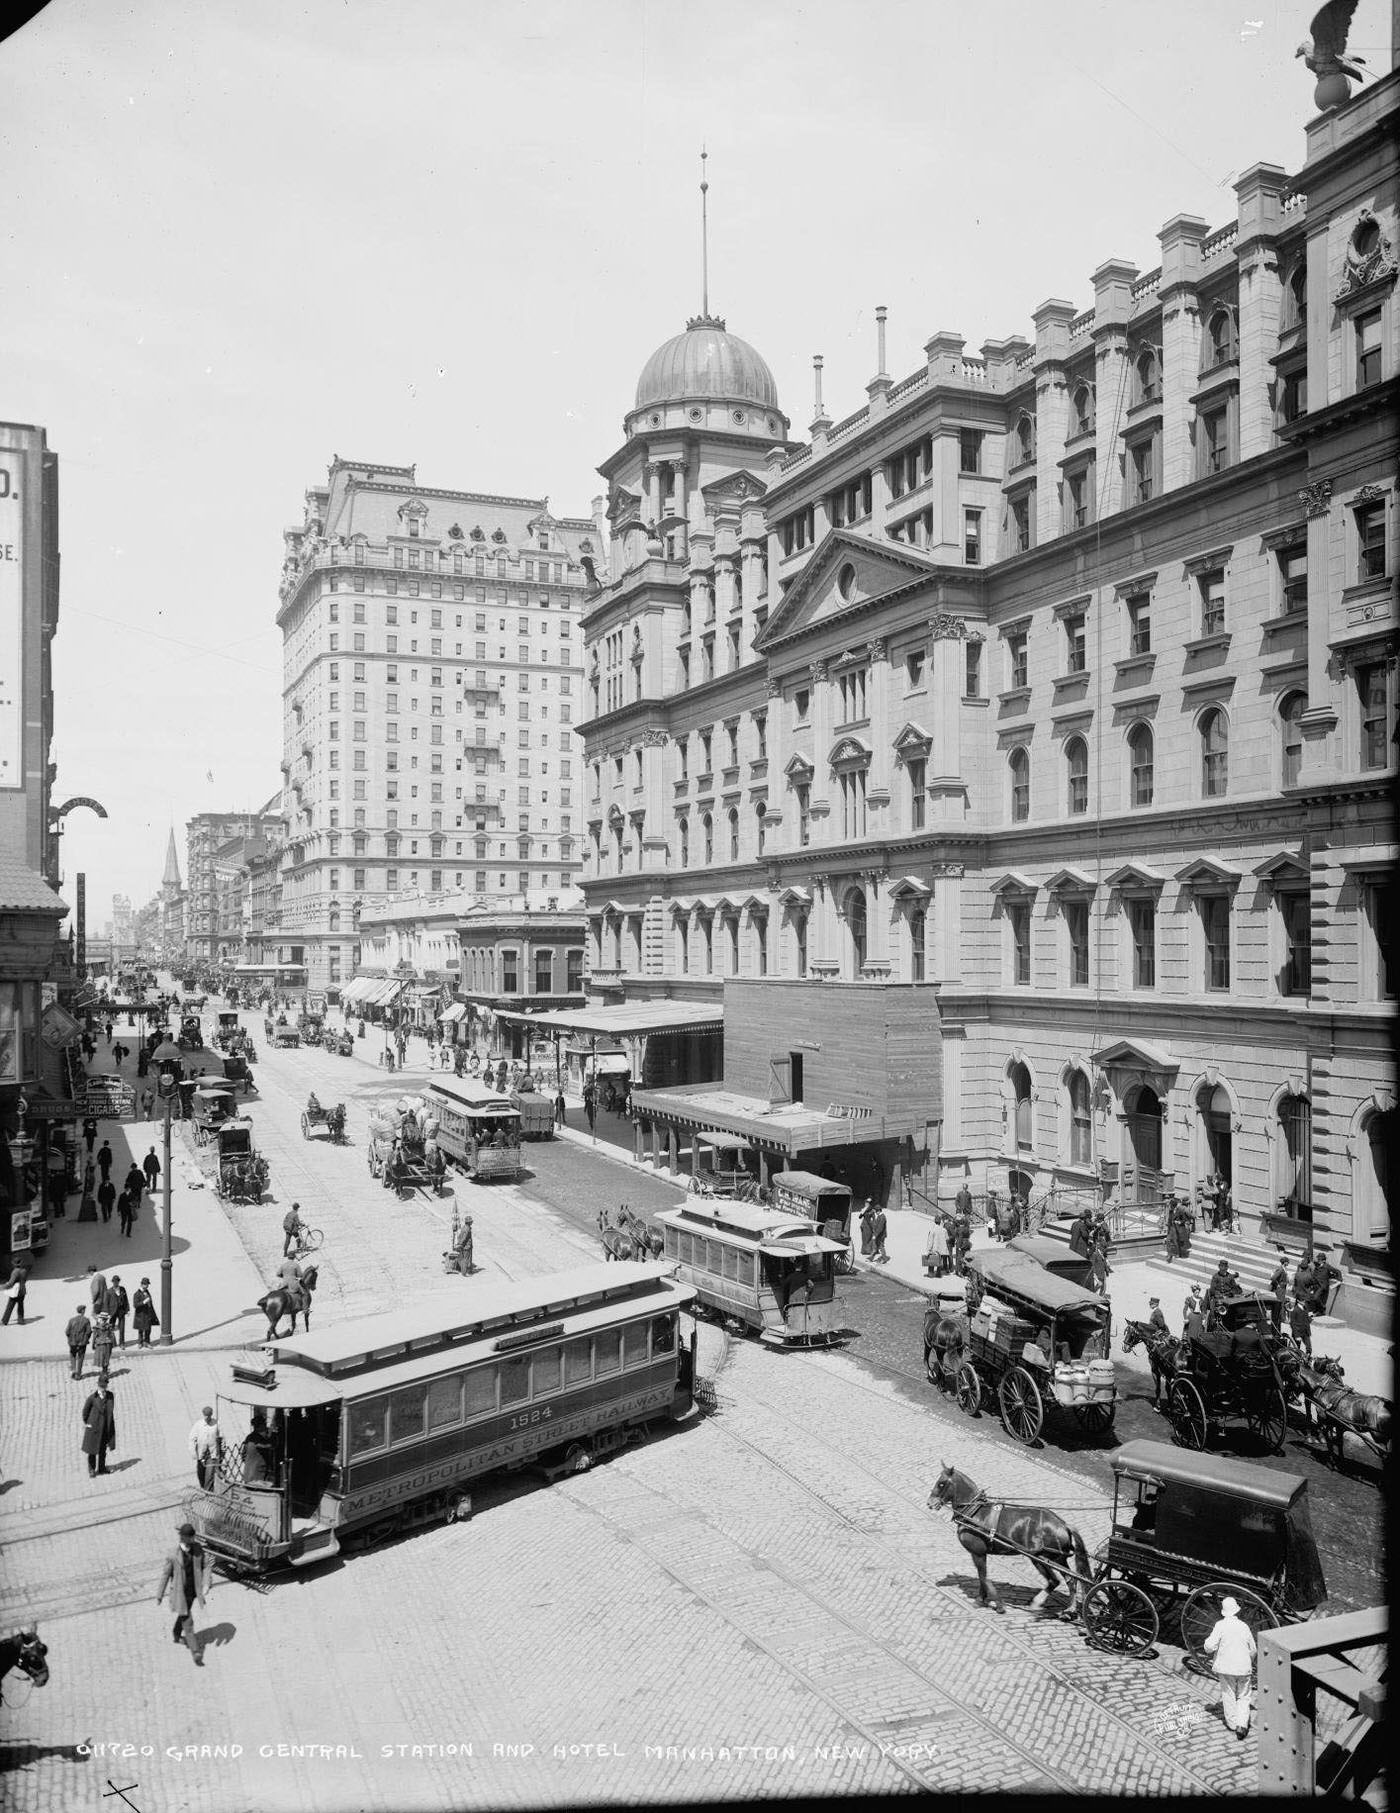 Grand Central Station And Hotel Manhattan, 1906